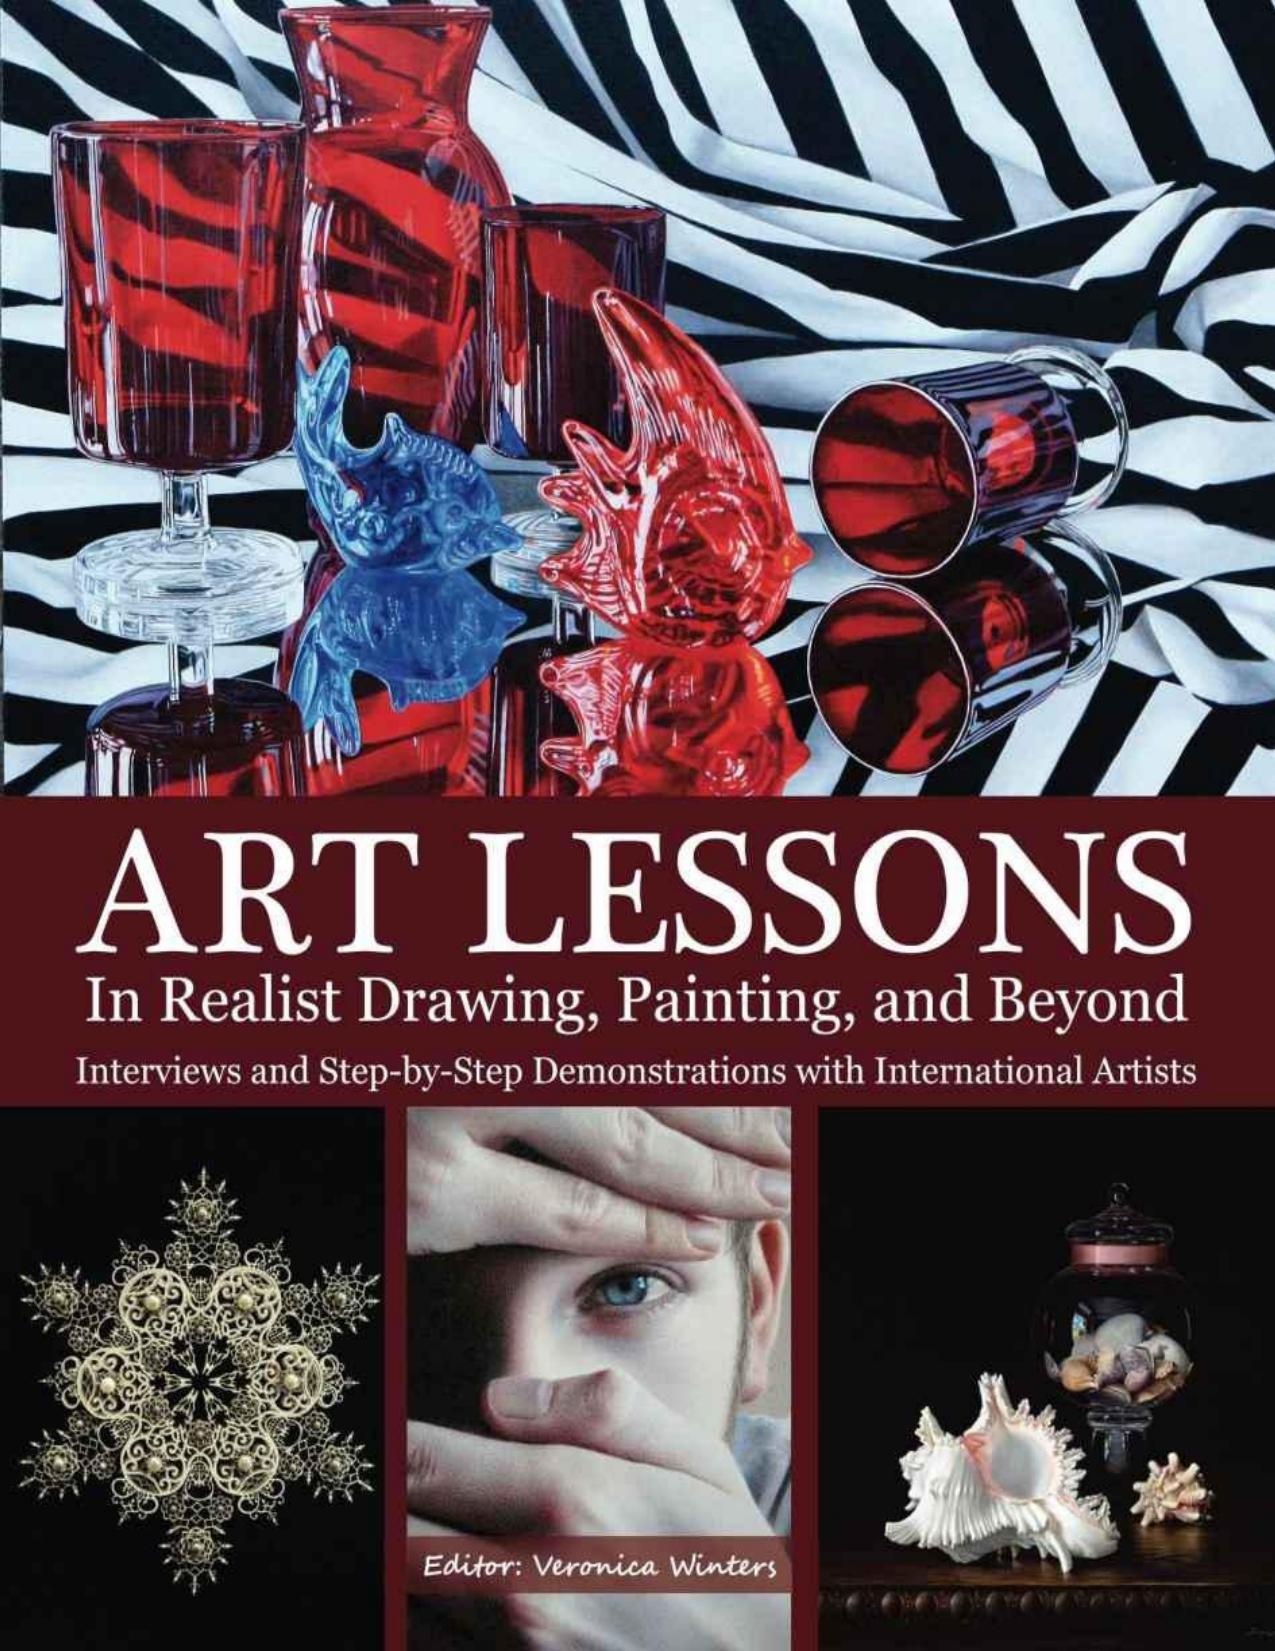 Art Lessons in Realist Drawing, Painting, and Beyond Interviews and Step-by-Step Demonstrations with International Artists - PDFDrive.com